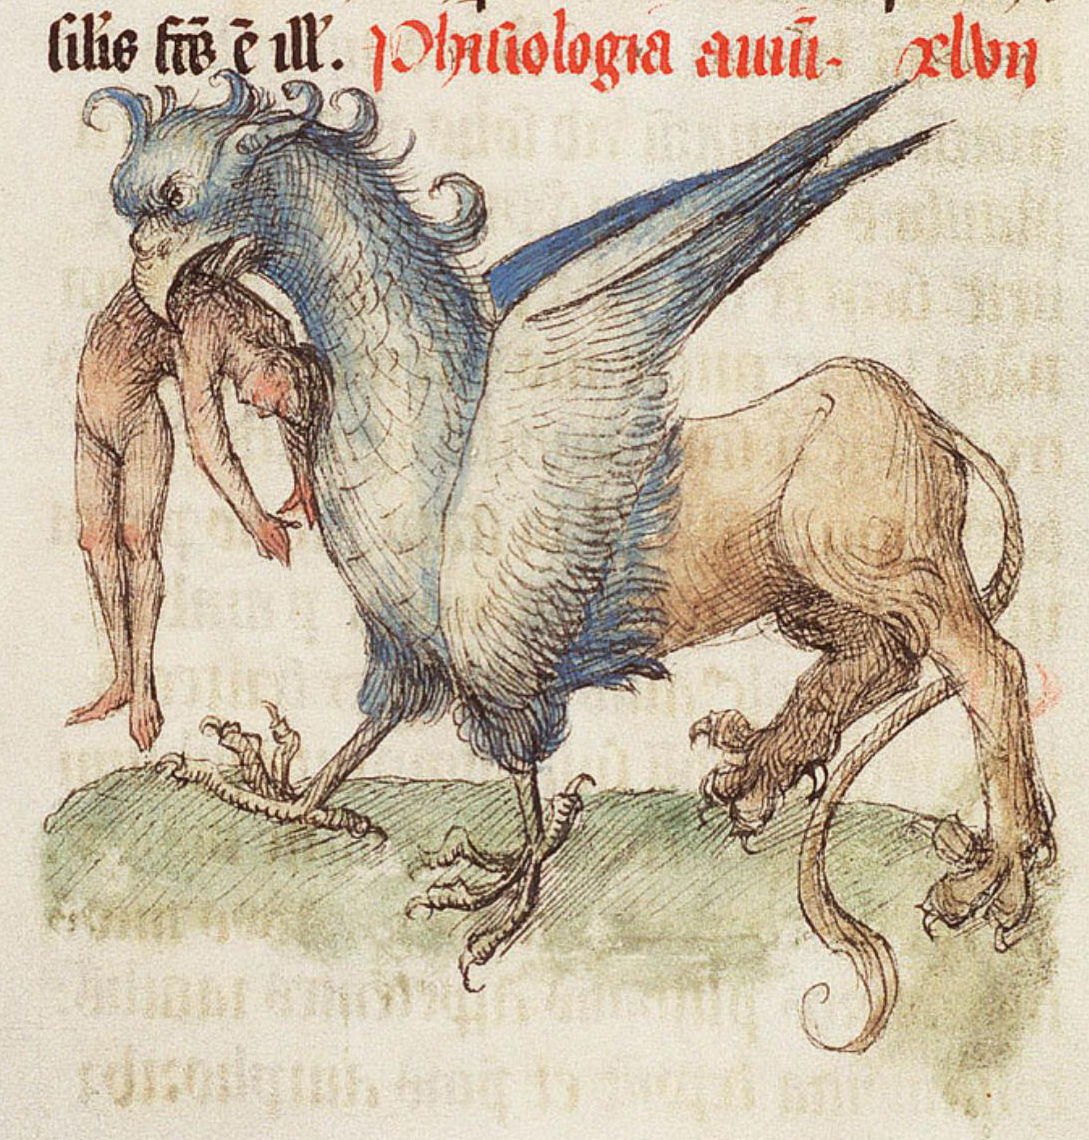 Griffin (detail) from Book of Flowers, 1460, unknown illuminator, made in France and Belgium. Parchment, 16 1/16 × 11 1/4 inches (The Hague, Koninklijke Bibliotheek, National Library of the Netherlands, Ms.72 A 23, fol. 46)